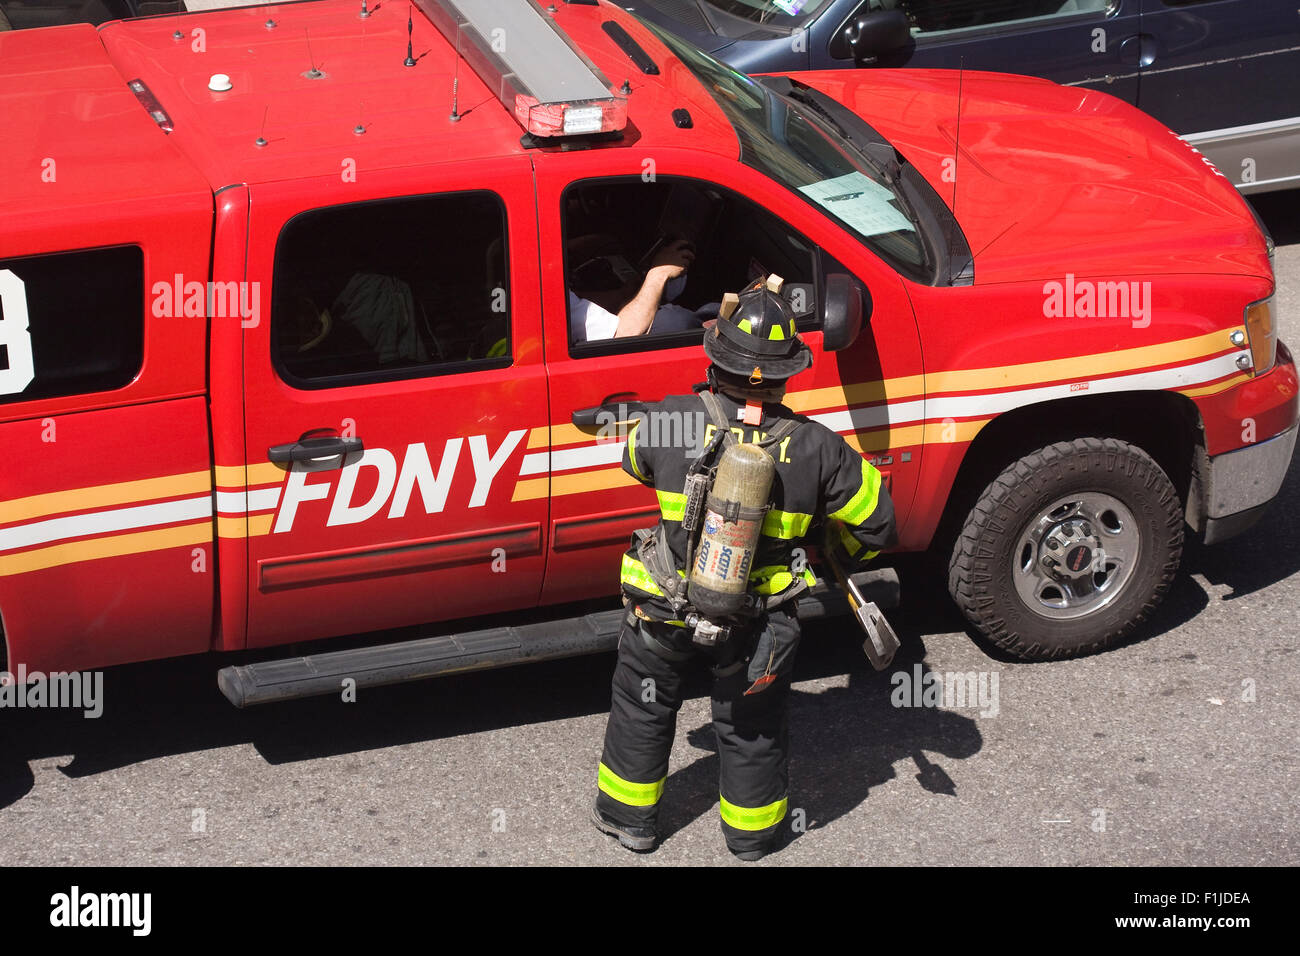 FDNY Firefighter in full turnout gear speaks with his supervisor in a red pickup truck on the street. Stock Photo